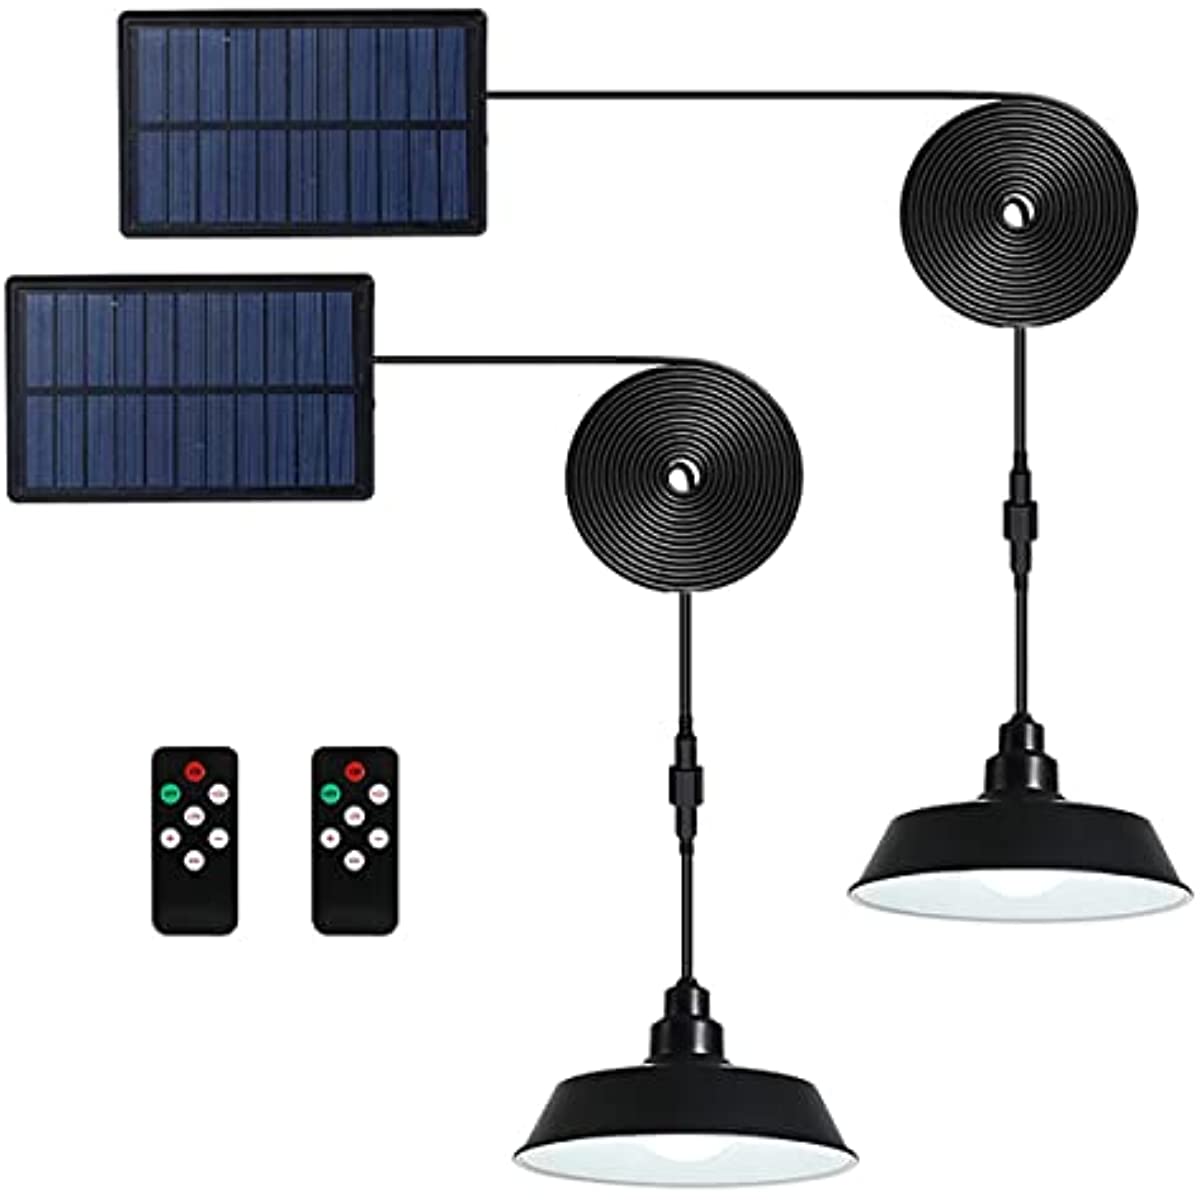 

2pcs/set Solar Pendant Lights Outdoor Indoor With Remote Control, Available Daytime Shed Light With 4 Lighting Modes Waterproof For Home Garden Yard Barn Gazebo